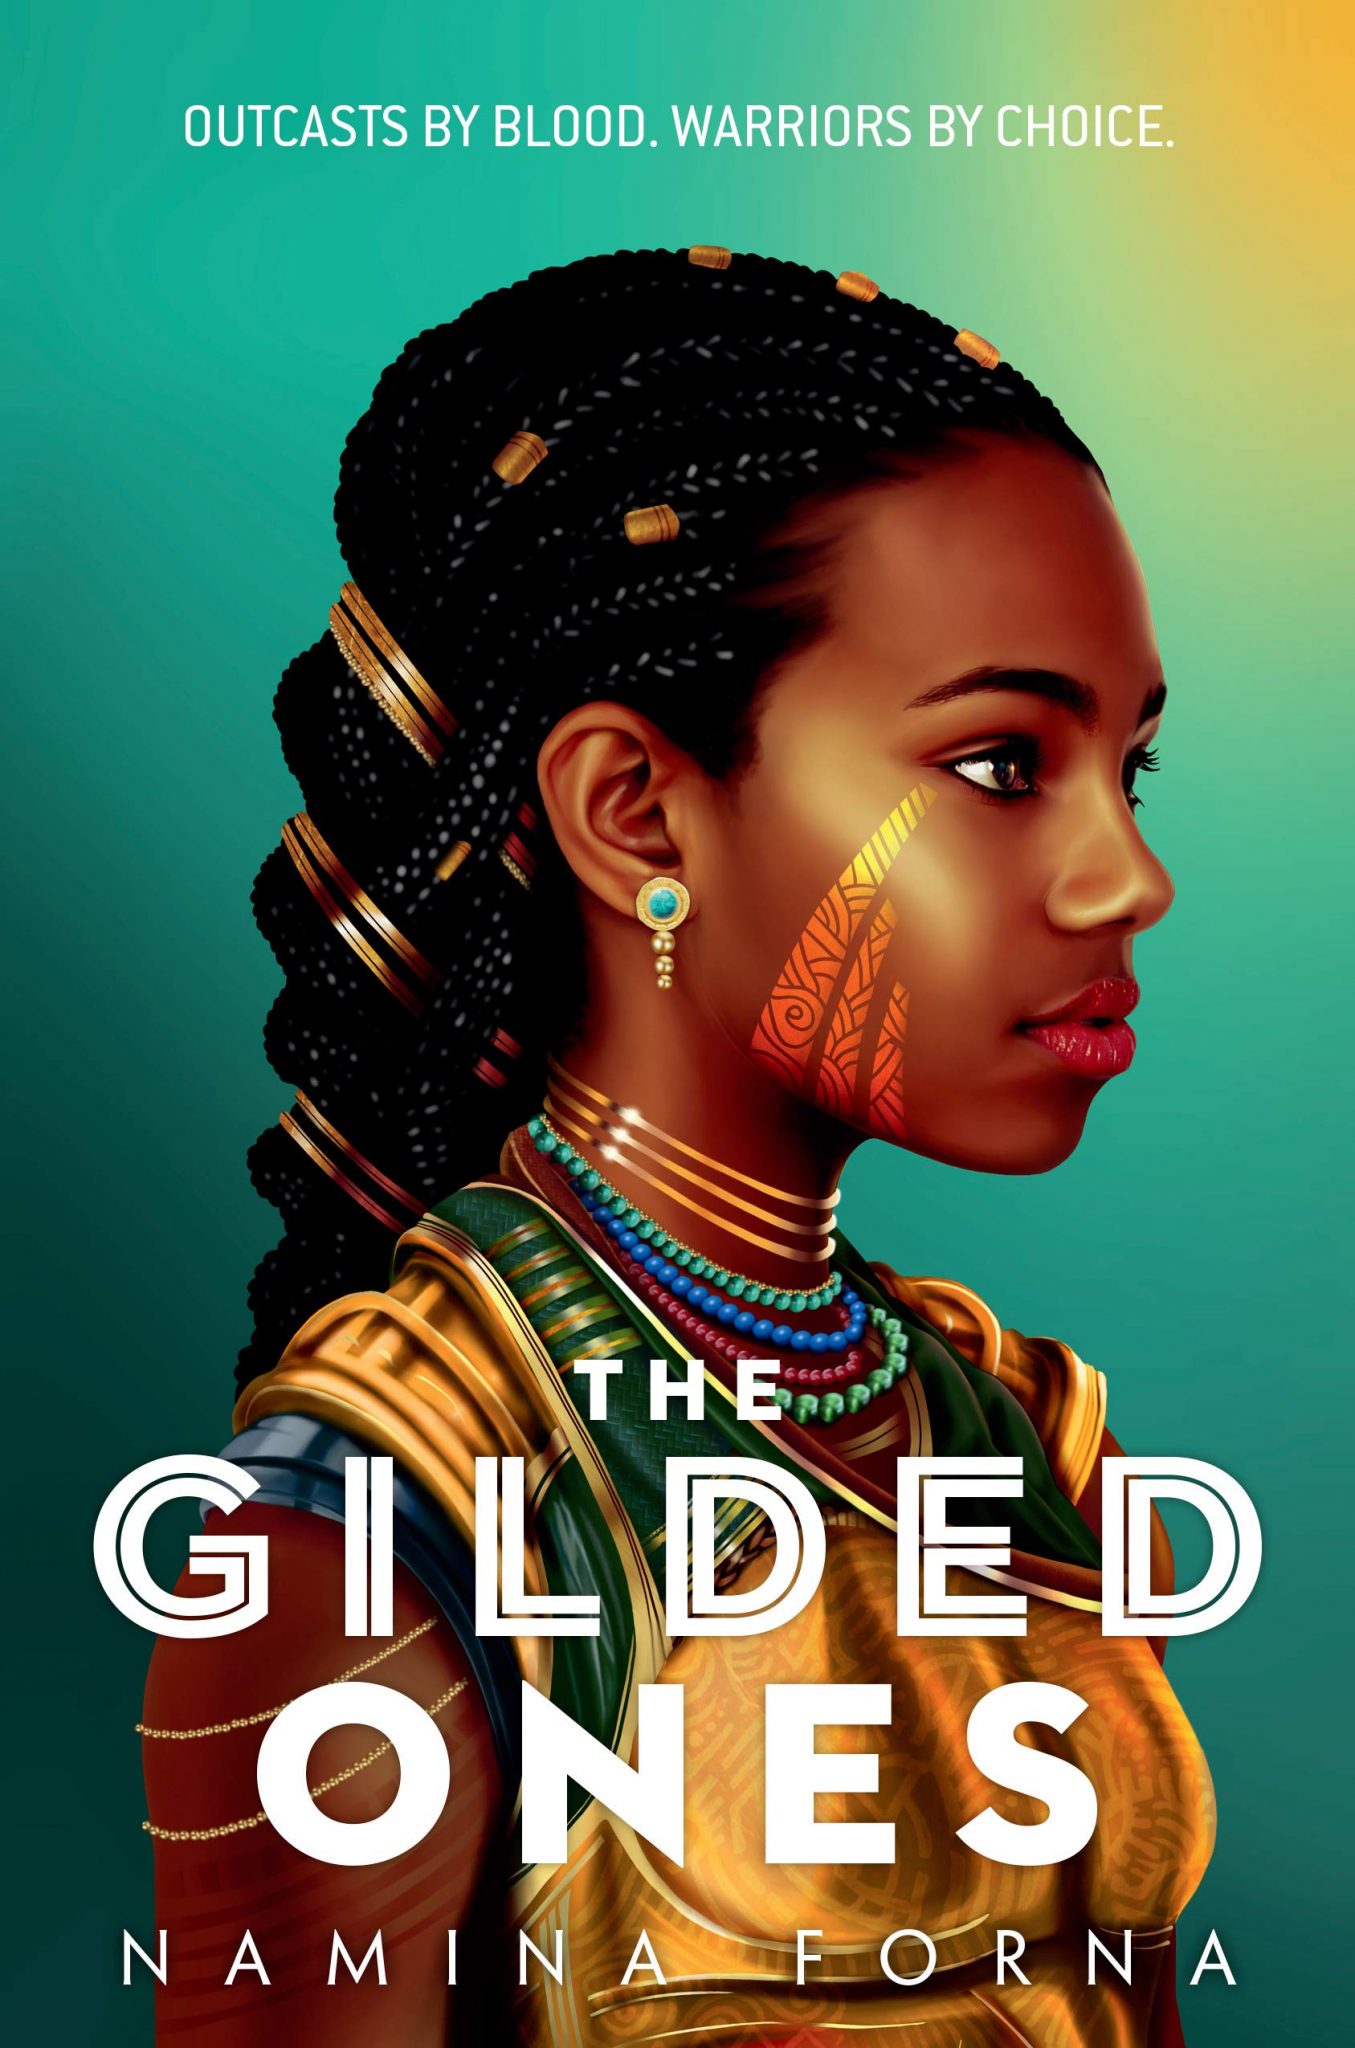 5 Books by female African authors we're excited to read this year